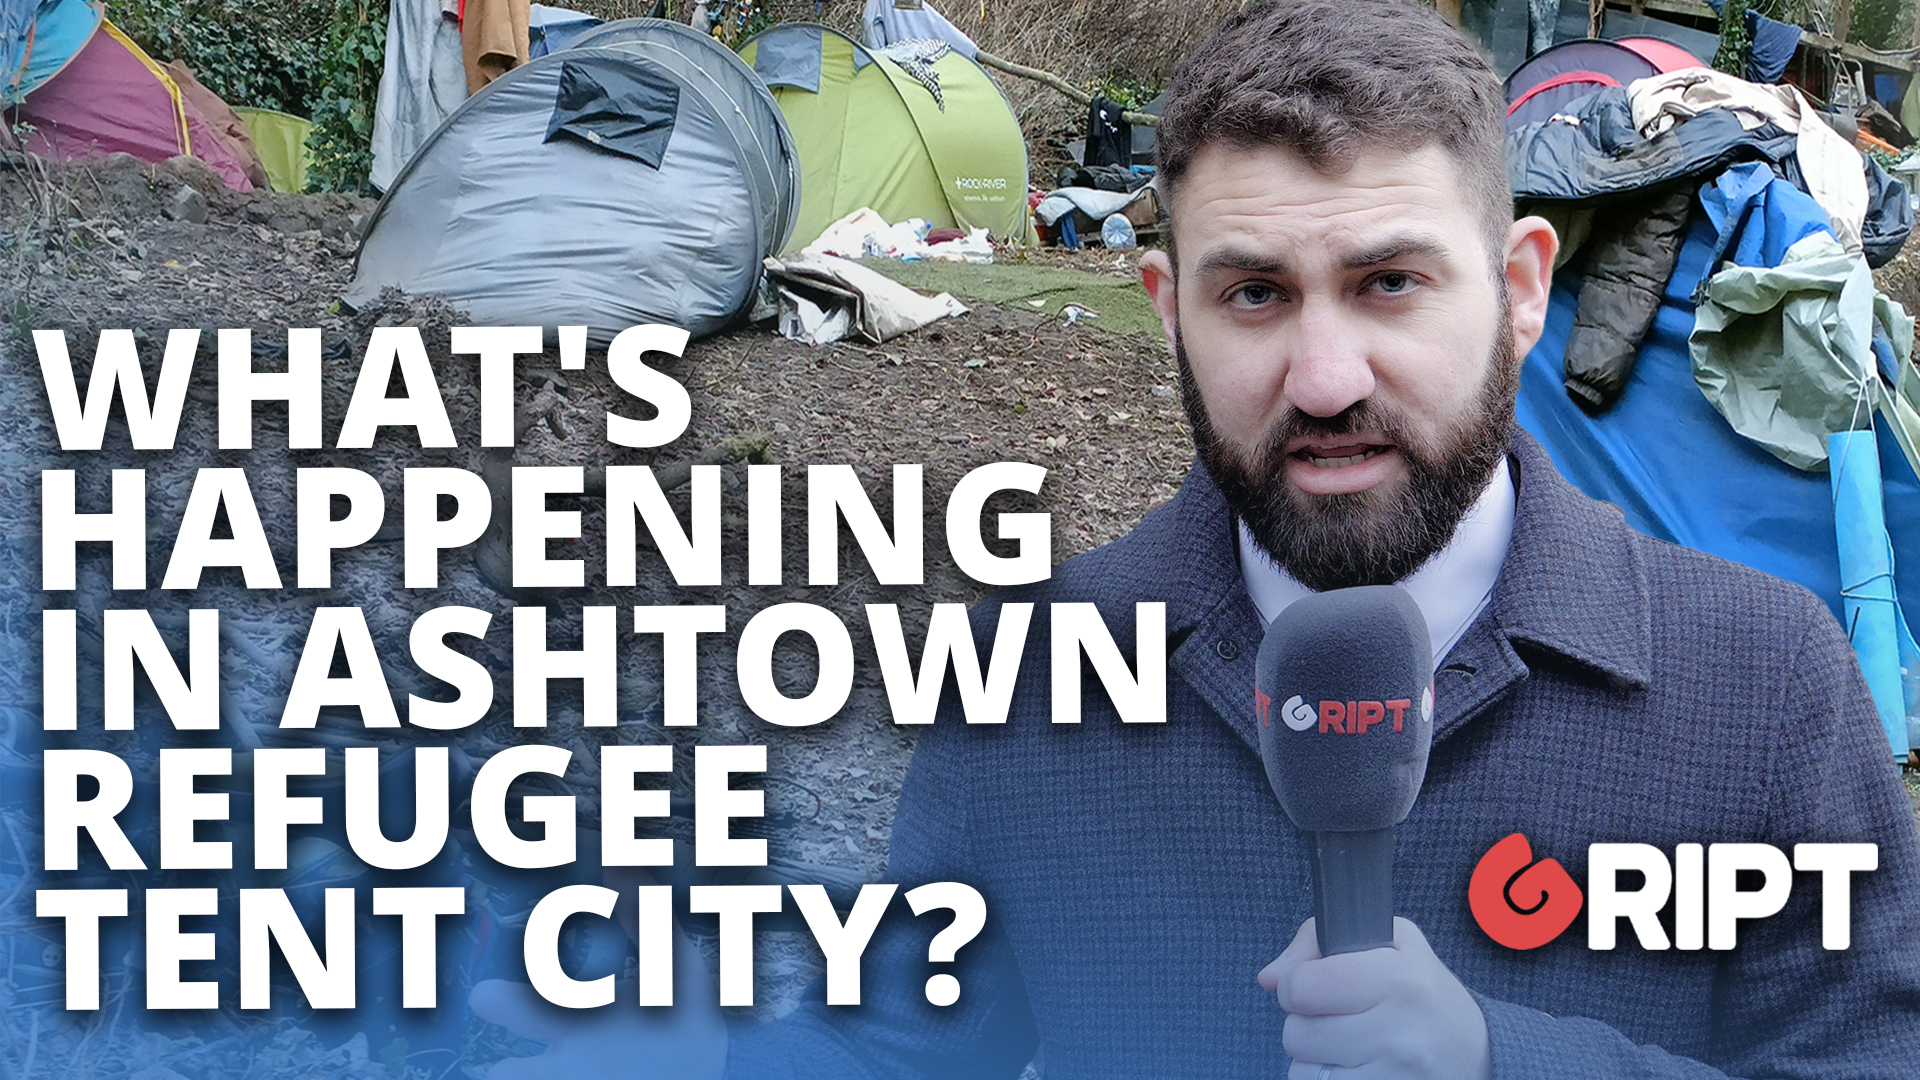 “This is in the middle of Dublin”: Gript reports from Ashtown migrant camp